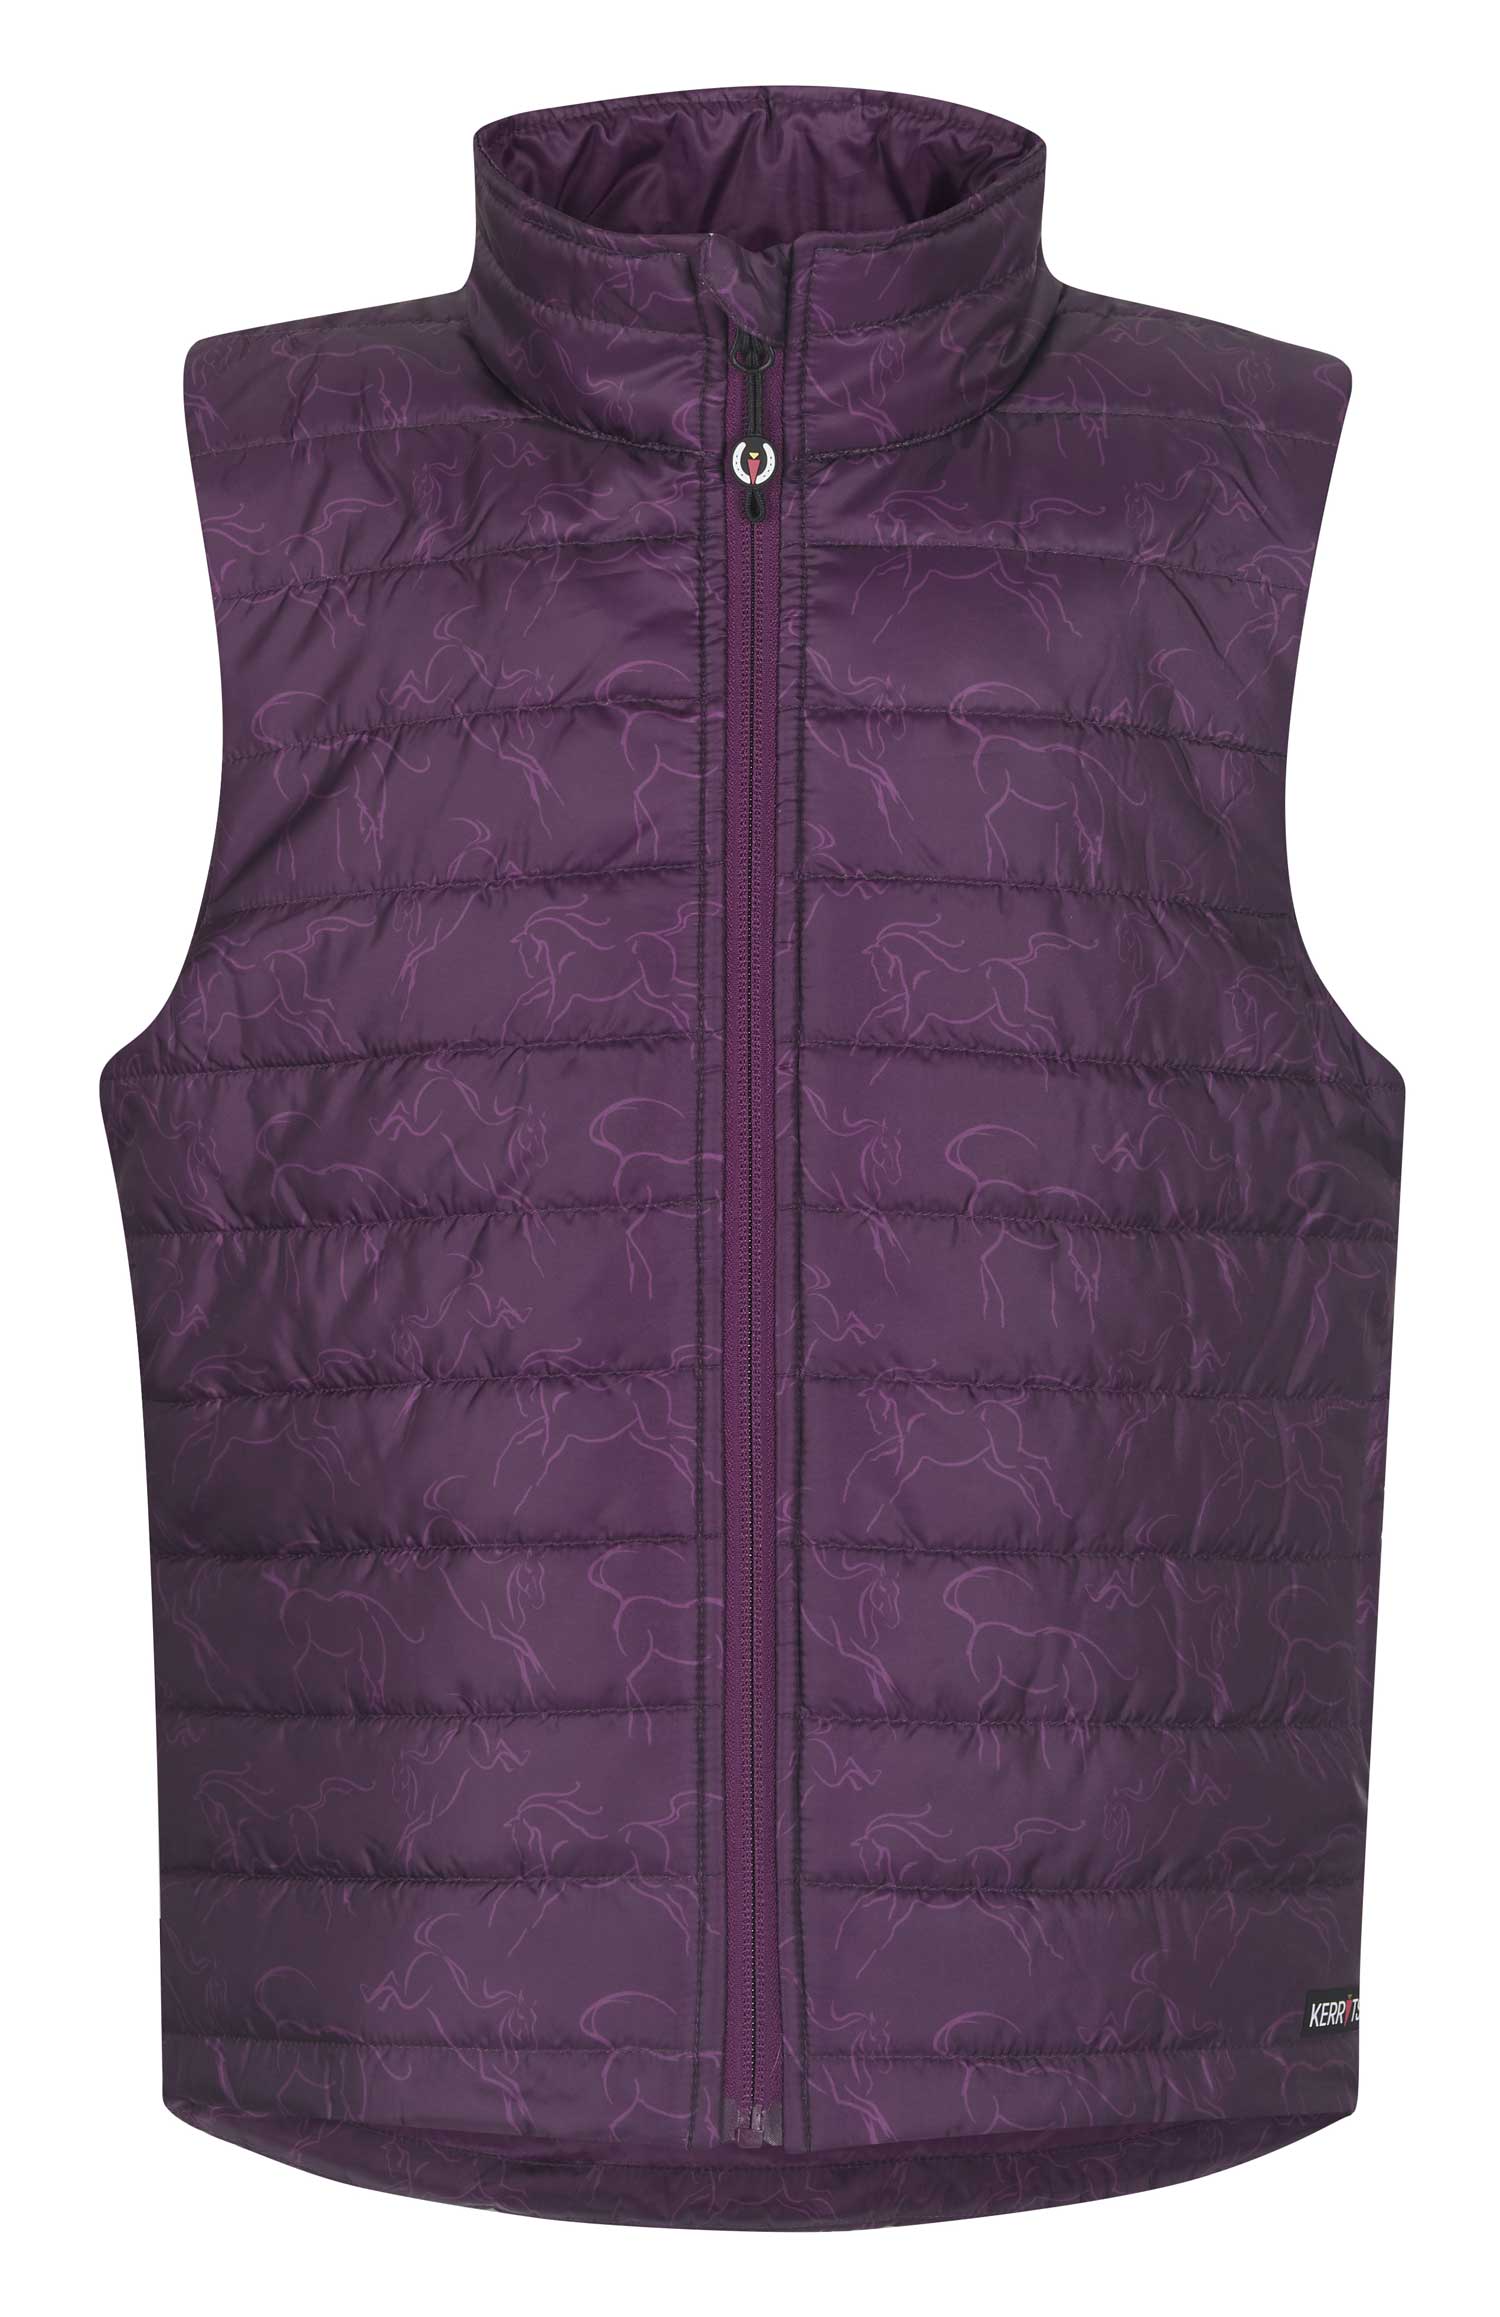 Kerrits Kids "Winter Whinnies" Quilted Vest #60279